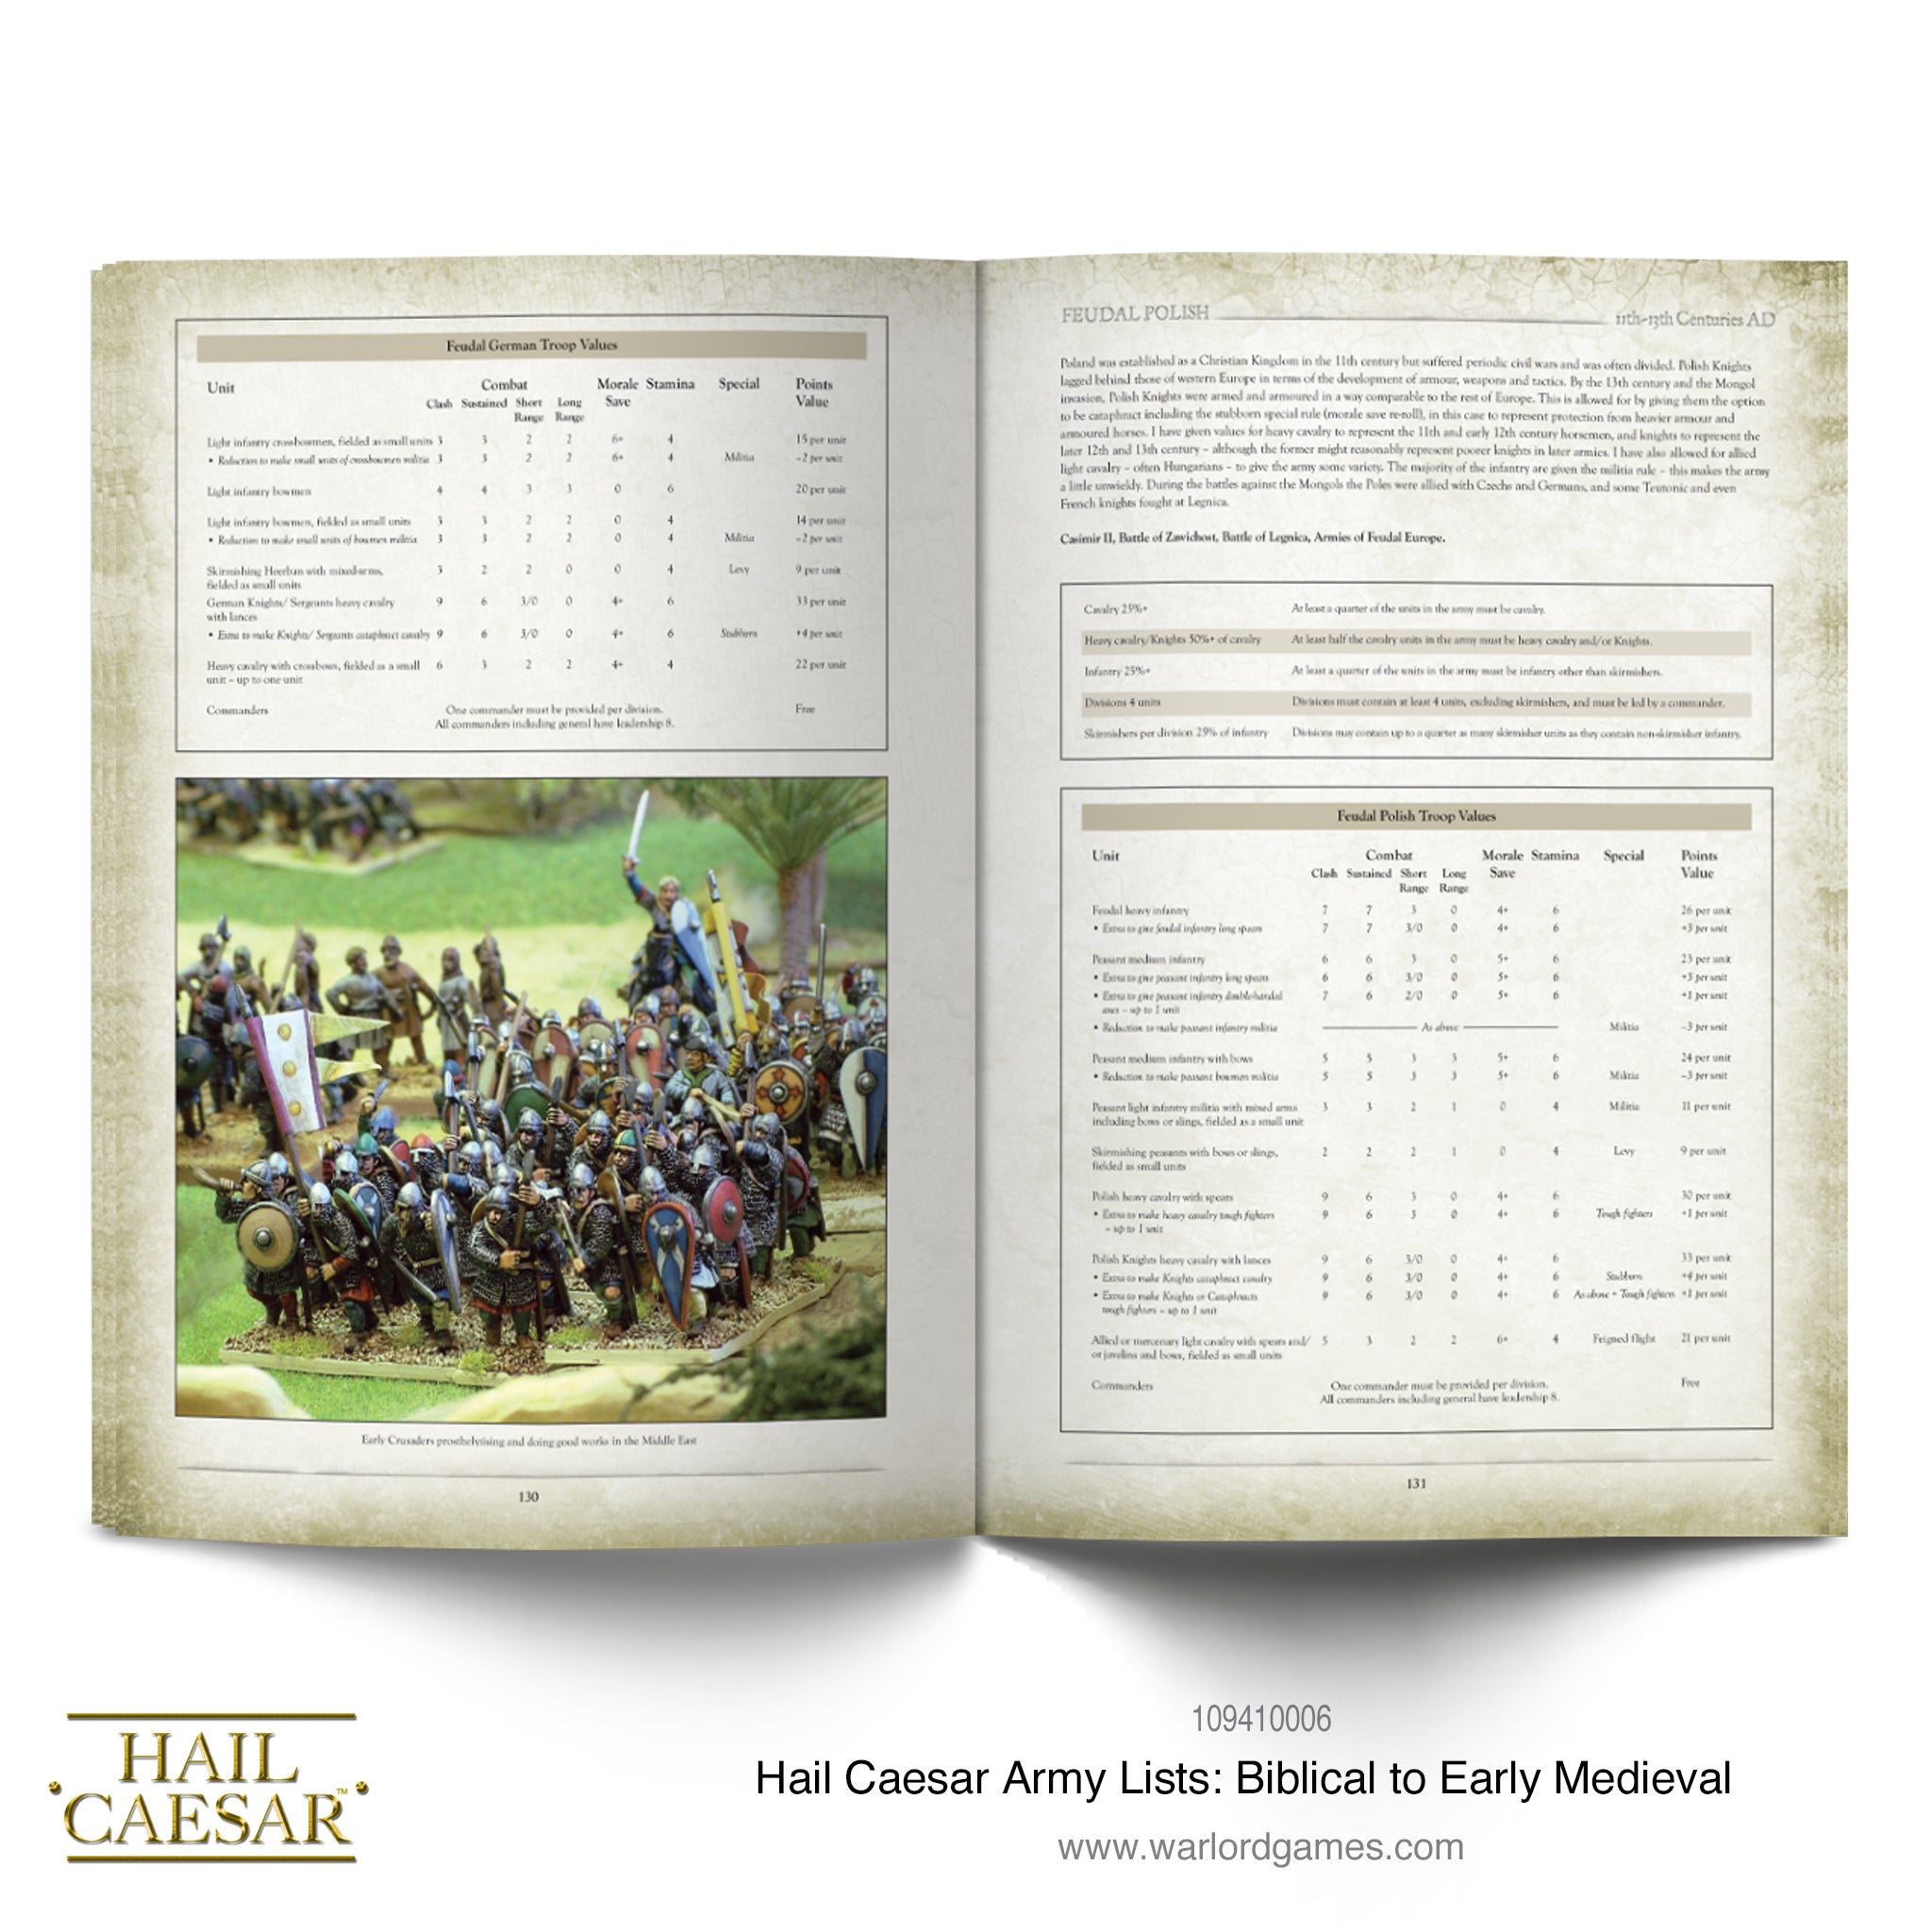 Hail Caesar Army Lists - Biblical to Early Medieval supplement